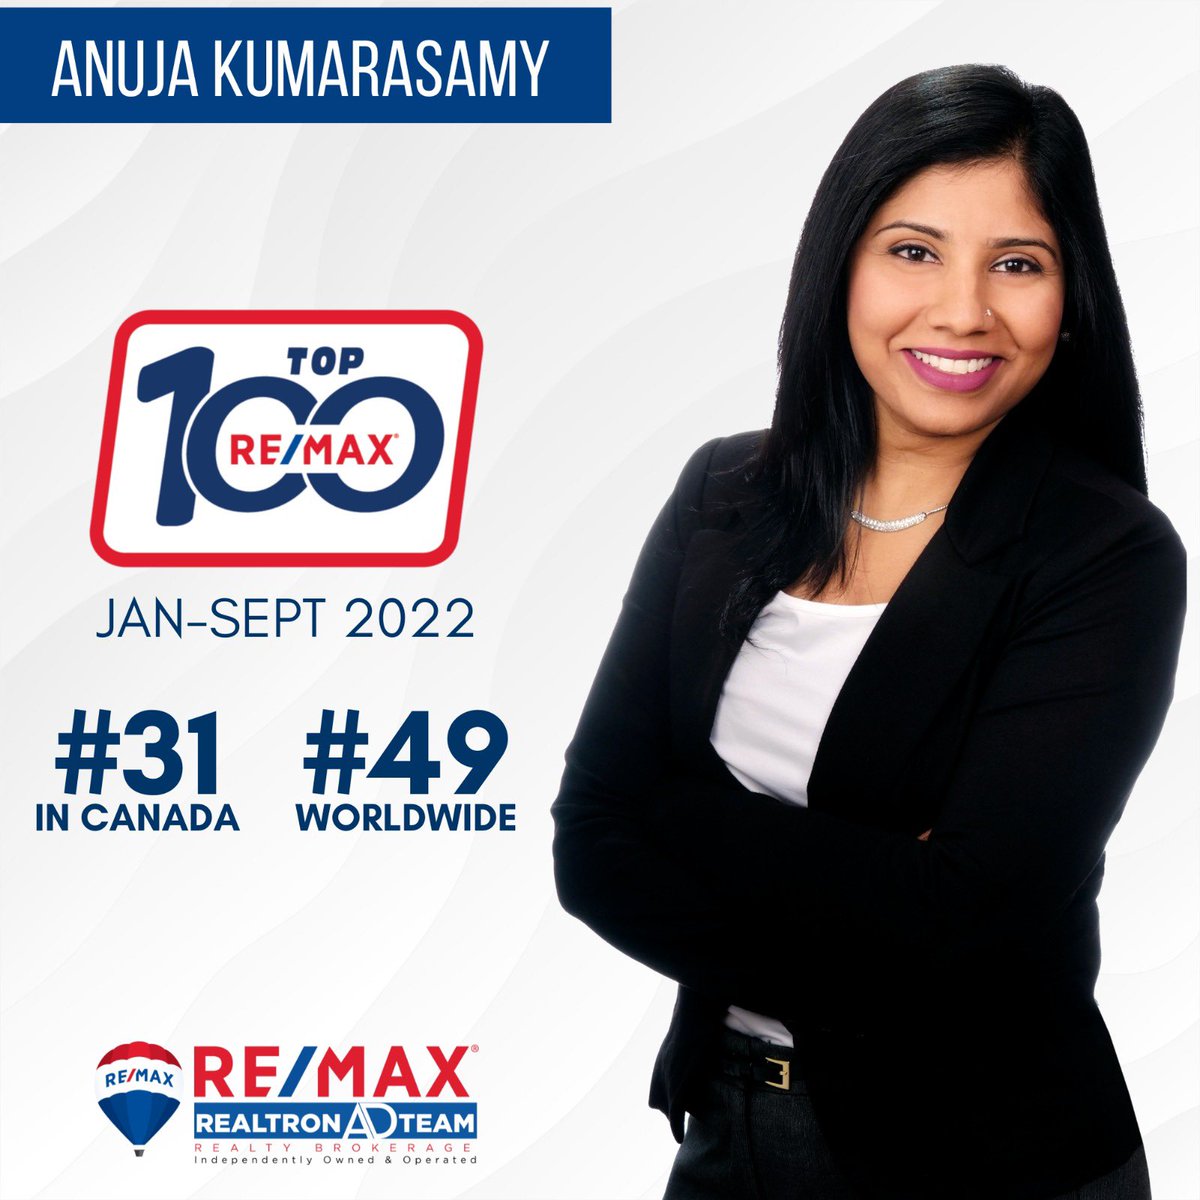 Thank you to my loyal clients, family, friends and god for allowing me to achieve such great milestones in my career🏅🙏🏼
#thankful #greateful #top100realtor #top100Canada #remaxrealtron #adteam #anujatherealtor #remxacanada #1realtor #ajaxrealtor #durhamrealtor #whitbyrealtor